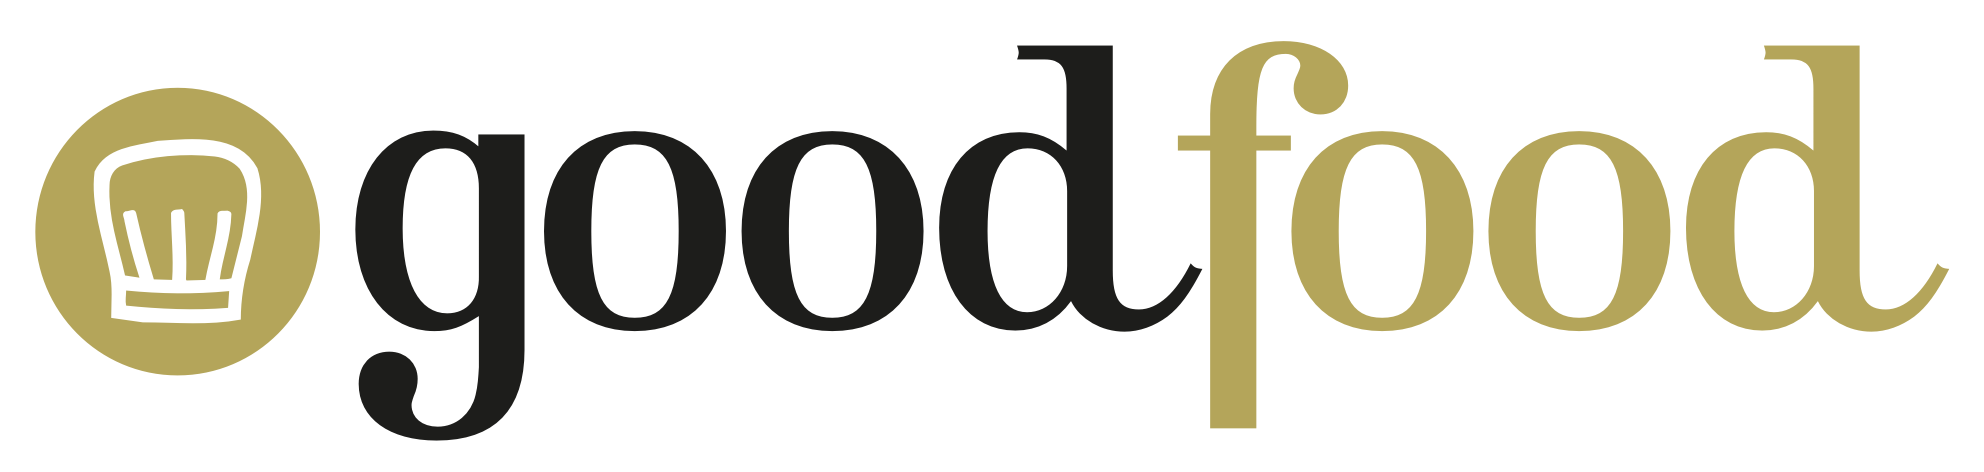 GoodFood-SpoonBay.png